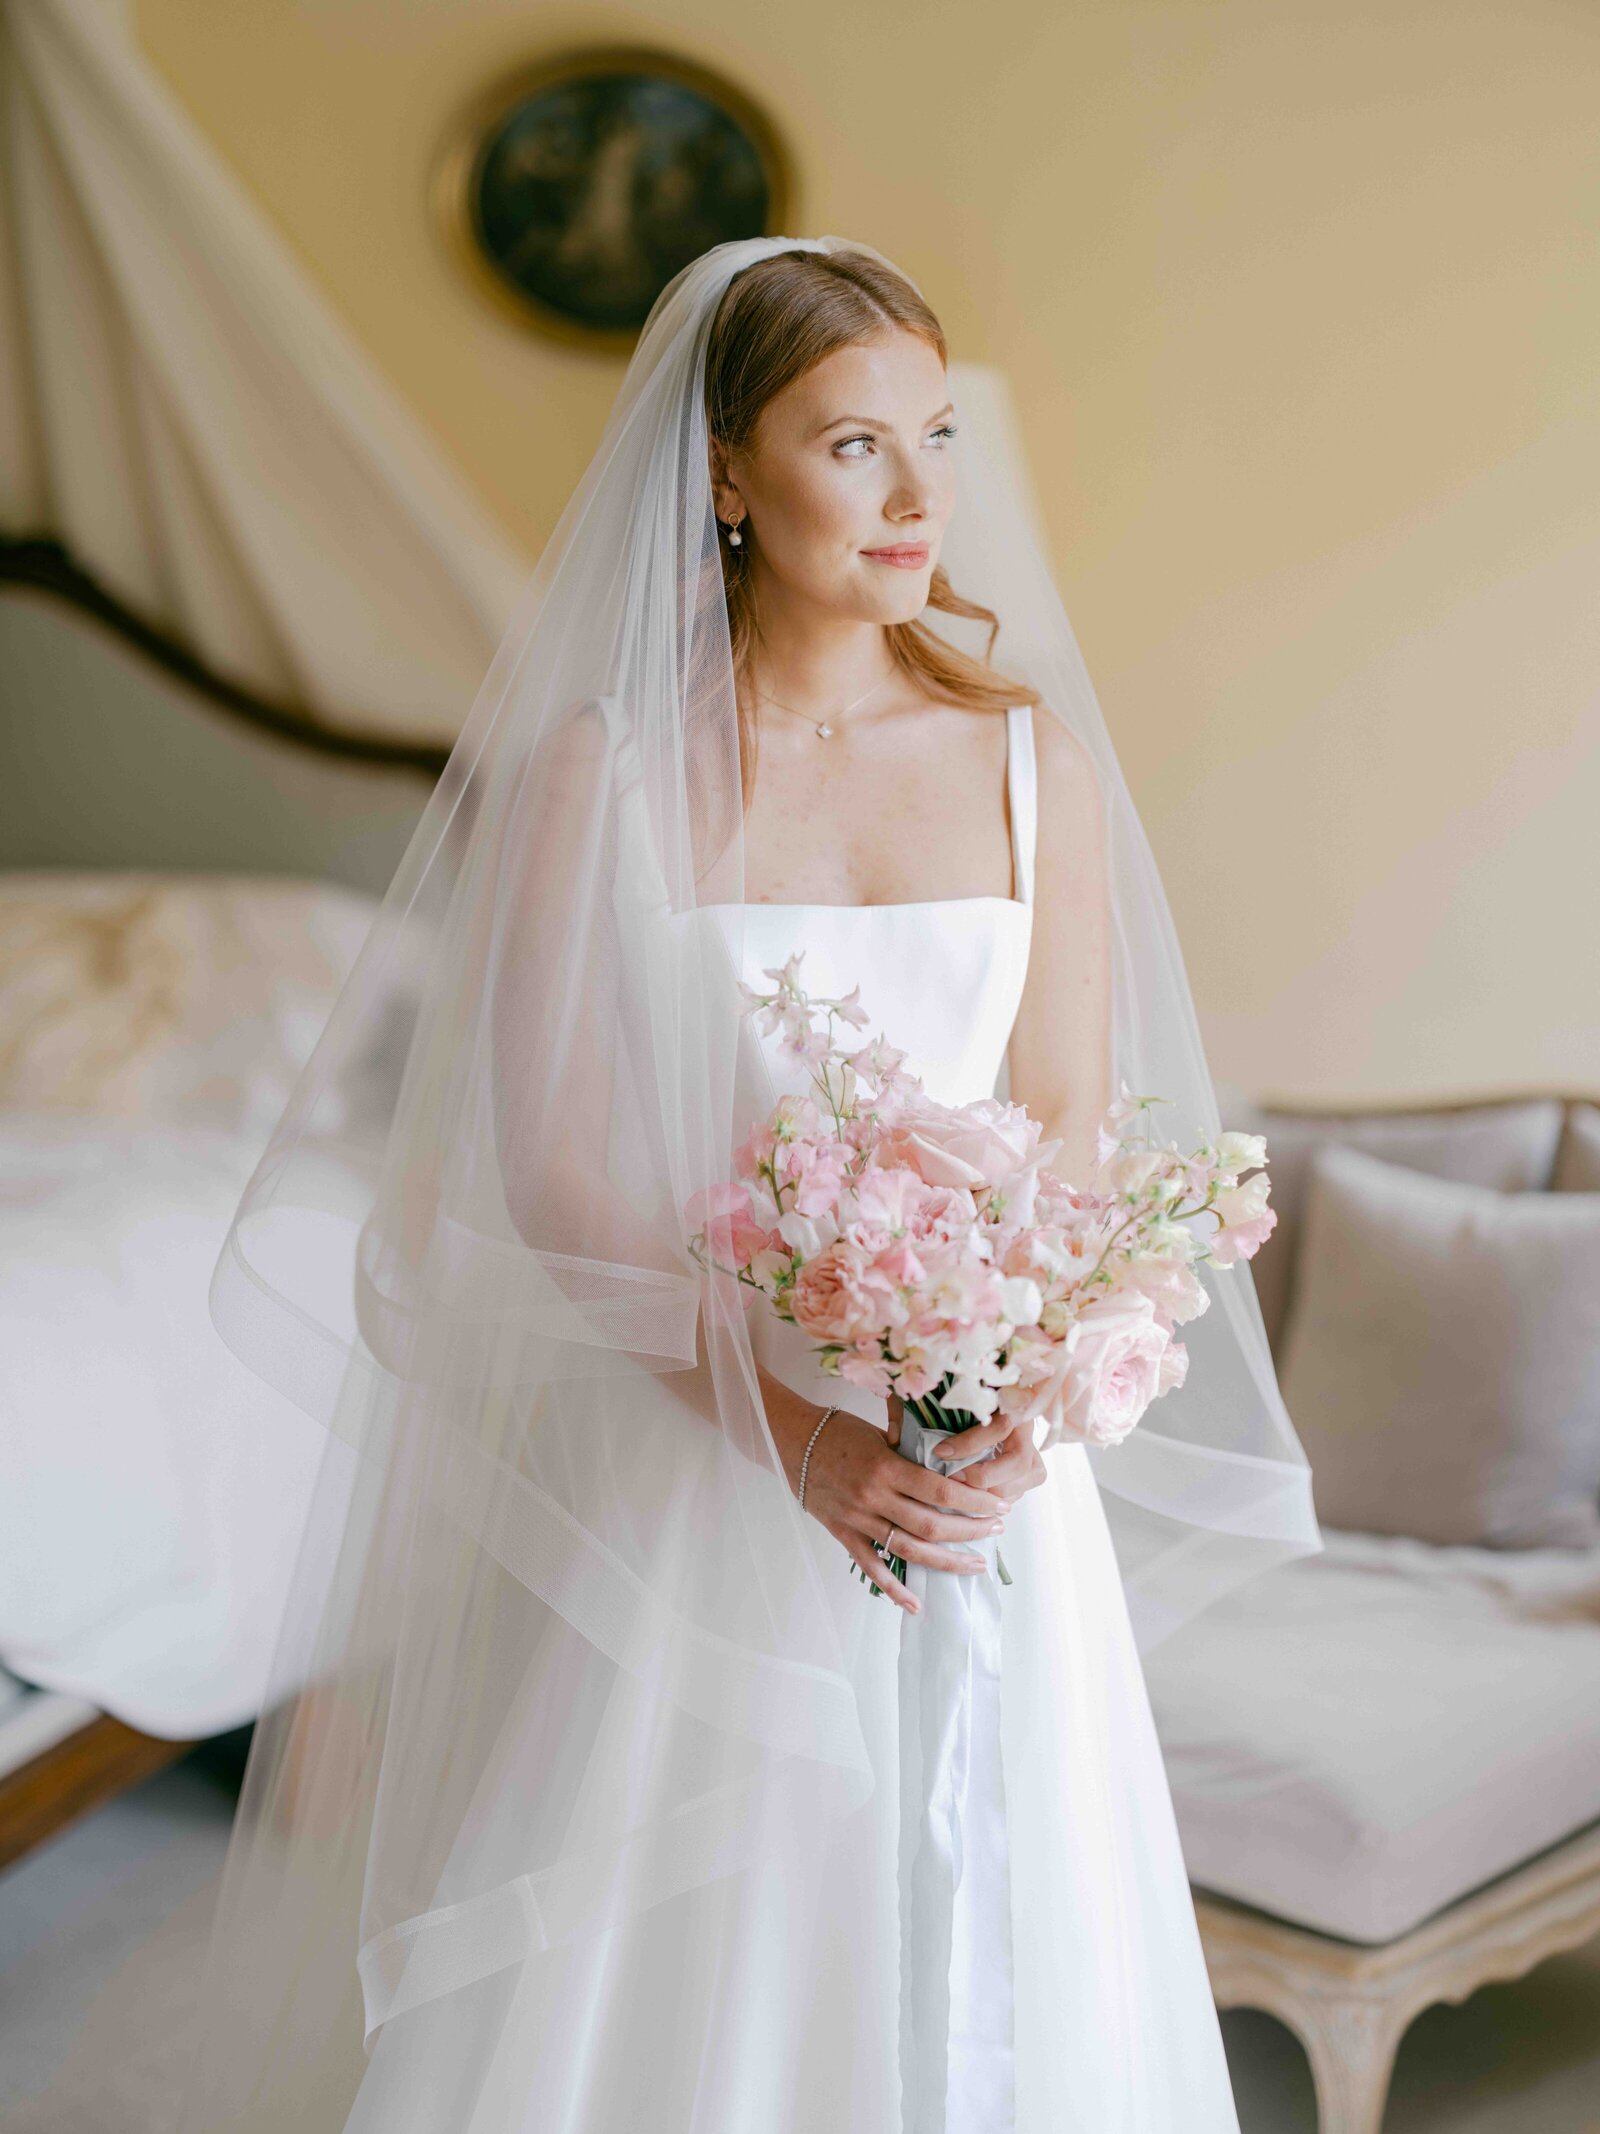 Portrait of bride in suite before wedding ceremony at Came House Manor